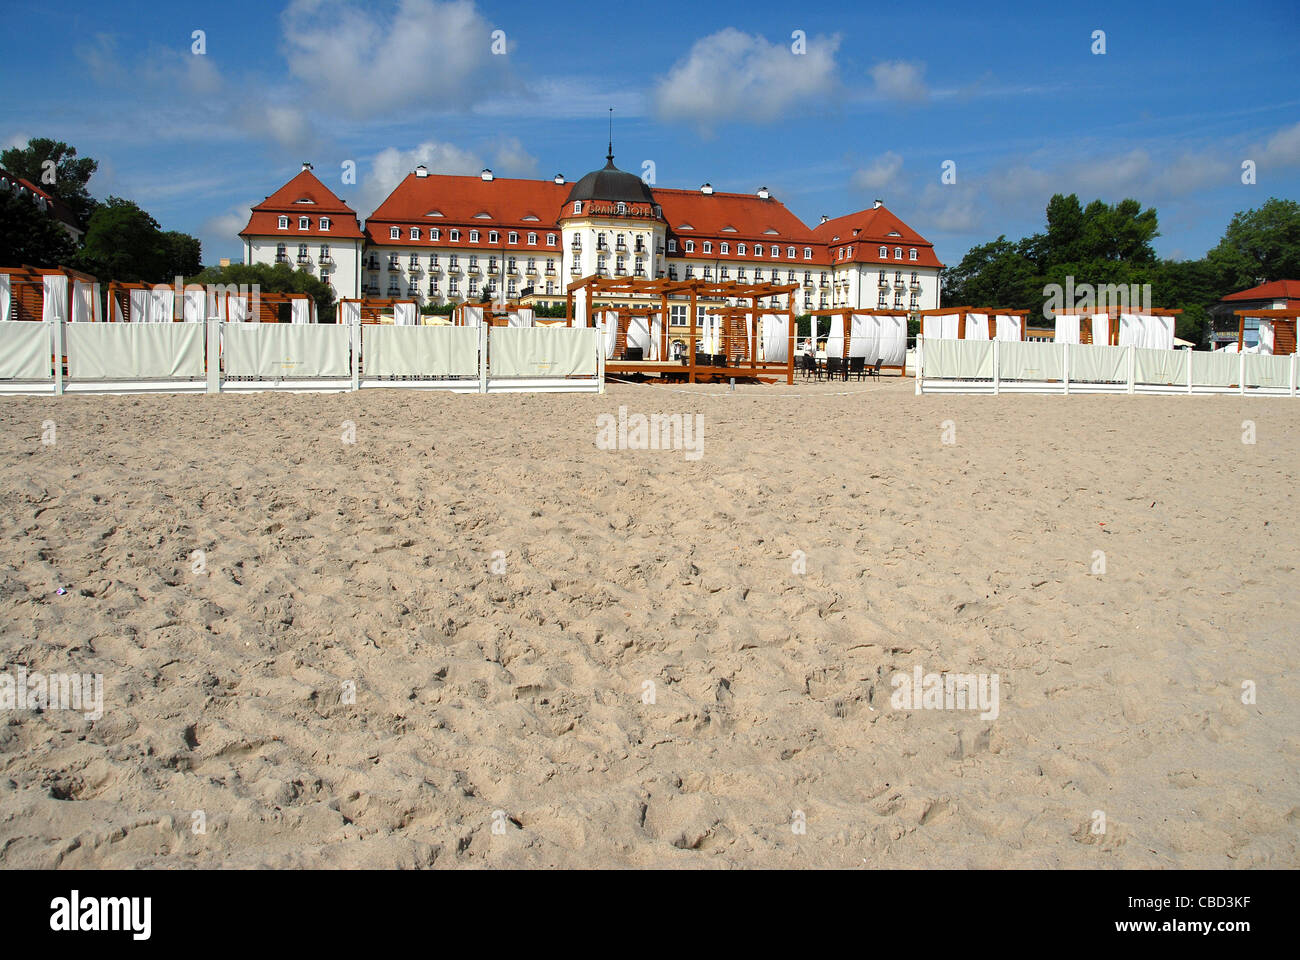 The majestic Grand Hotel at Sopot on the Baltic Sea coast near Gdansk seen from the beach and the hotel's summer club Stock Photo